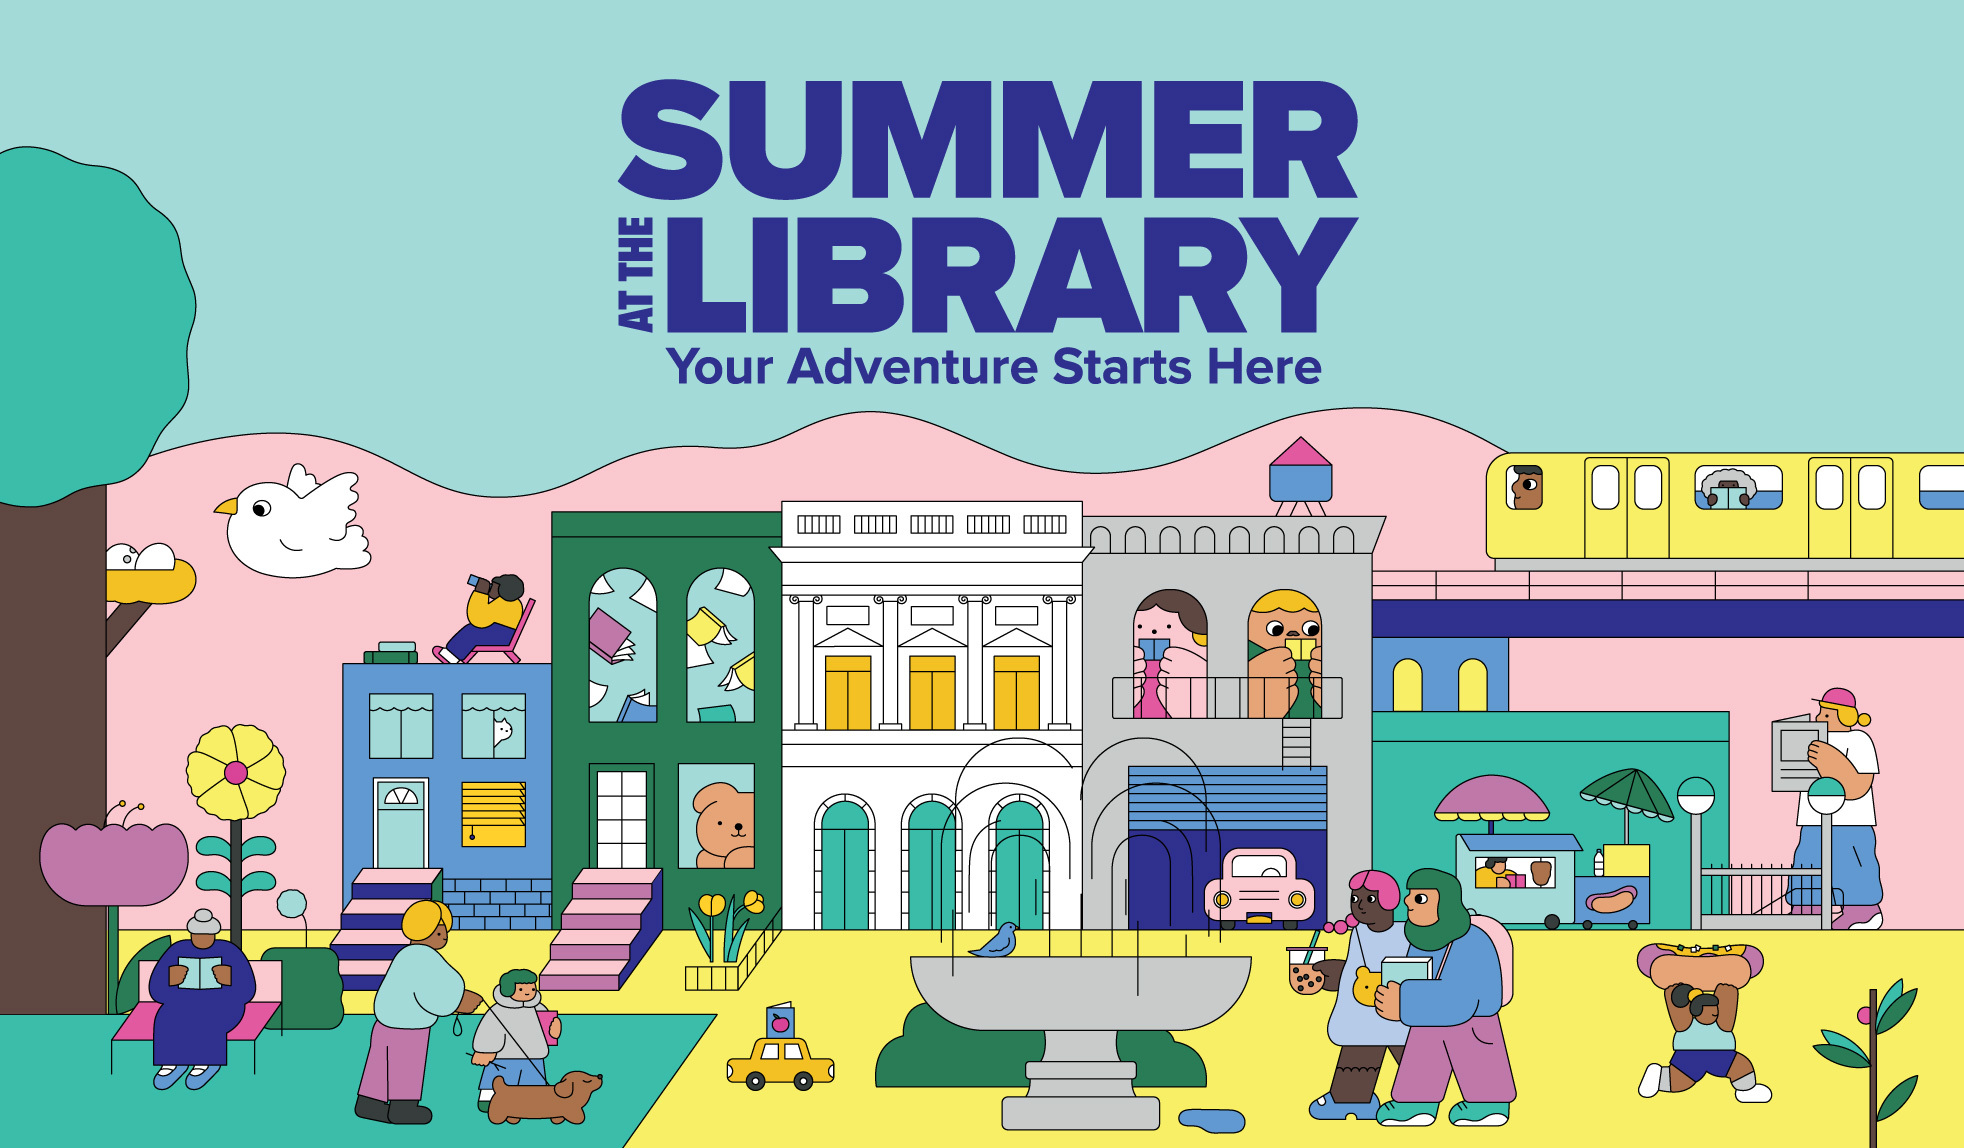 Summer Reading at QPL includes a wide range of books, resources, and activities for kids and adults!